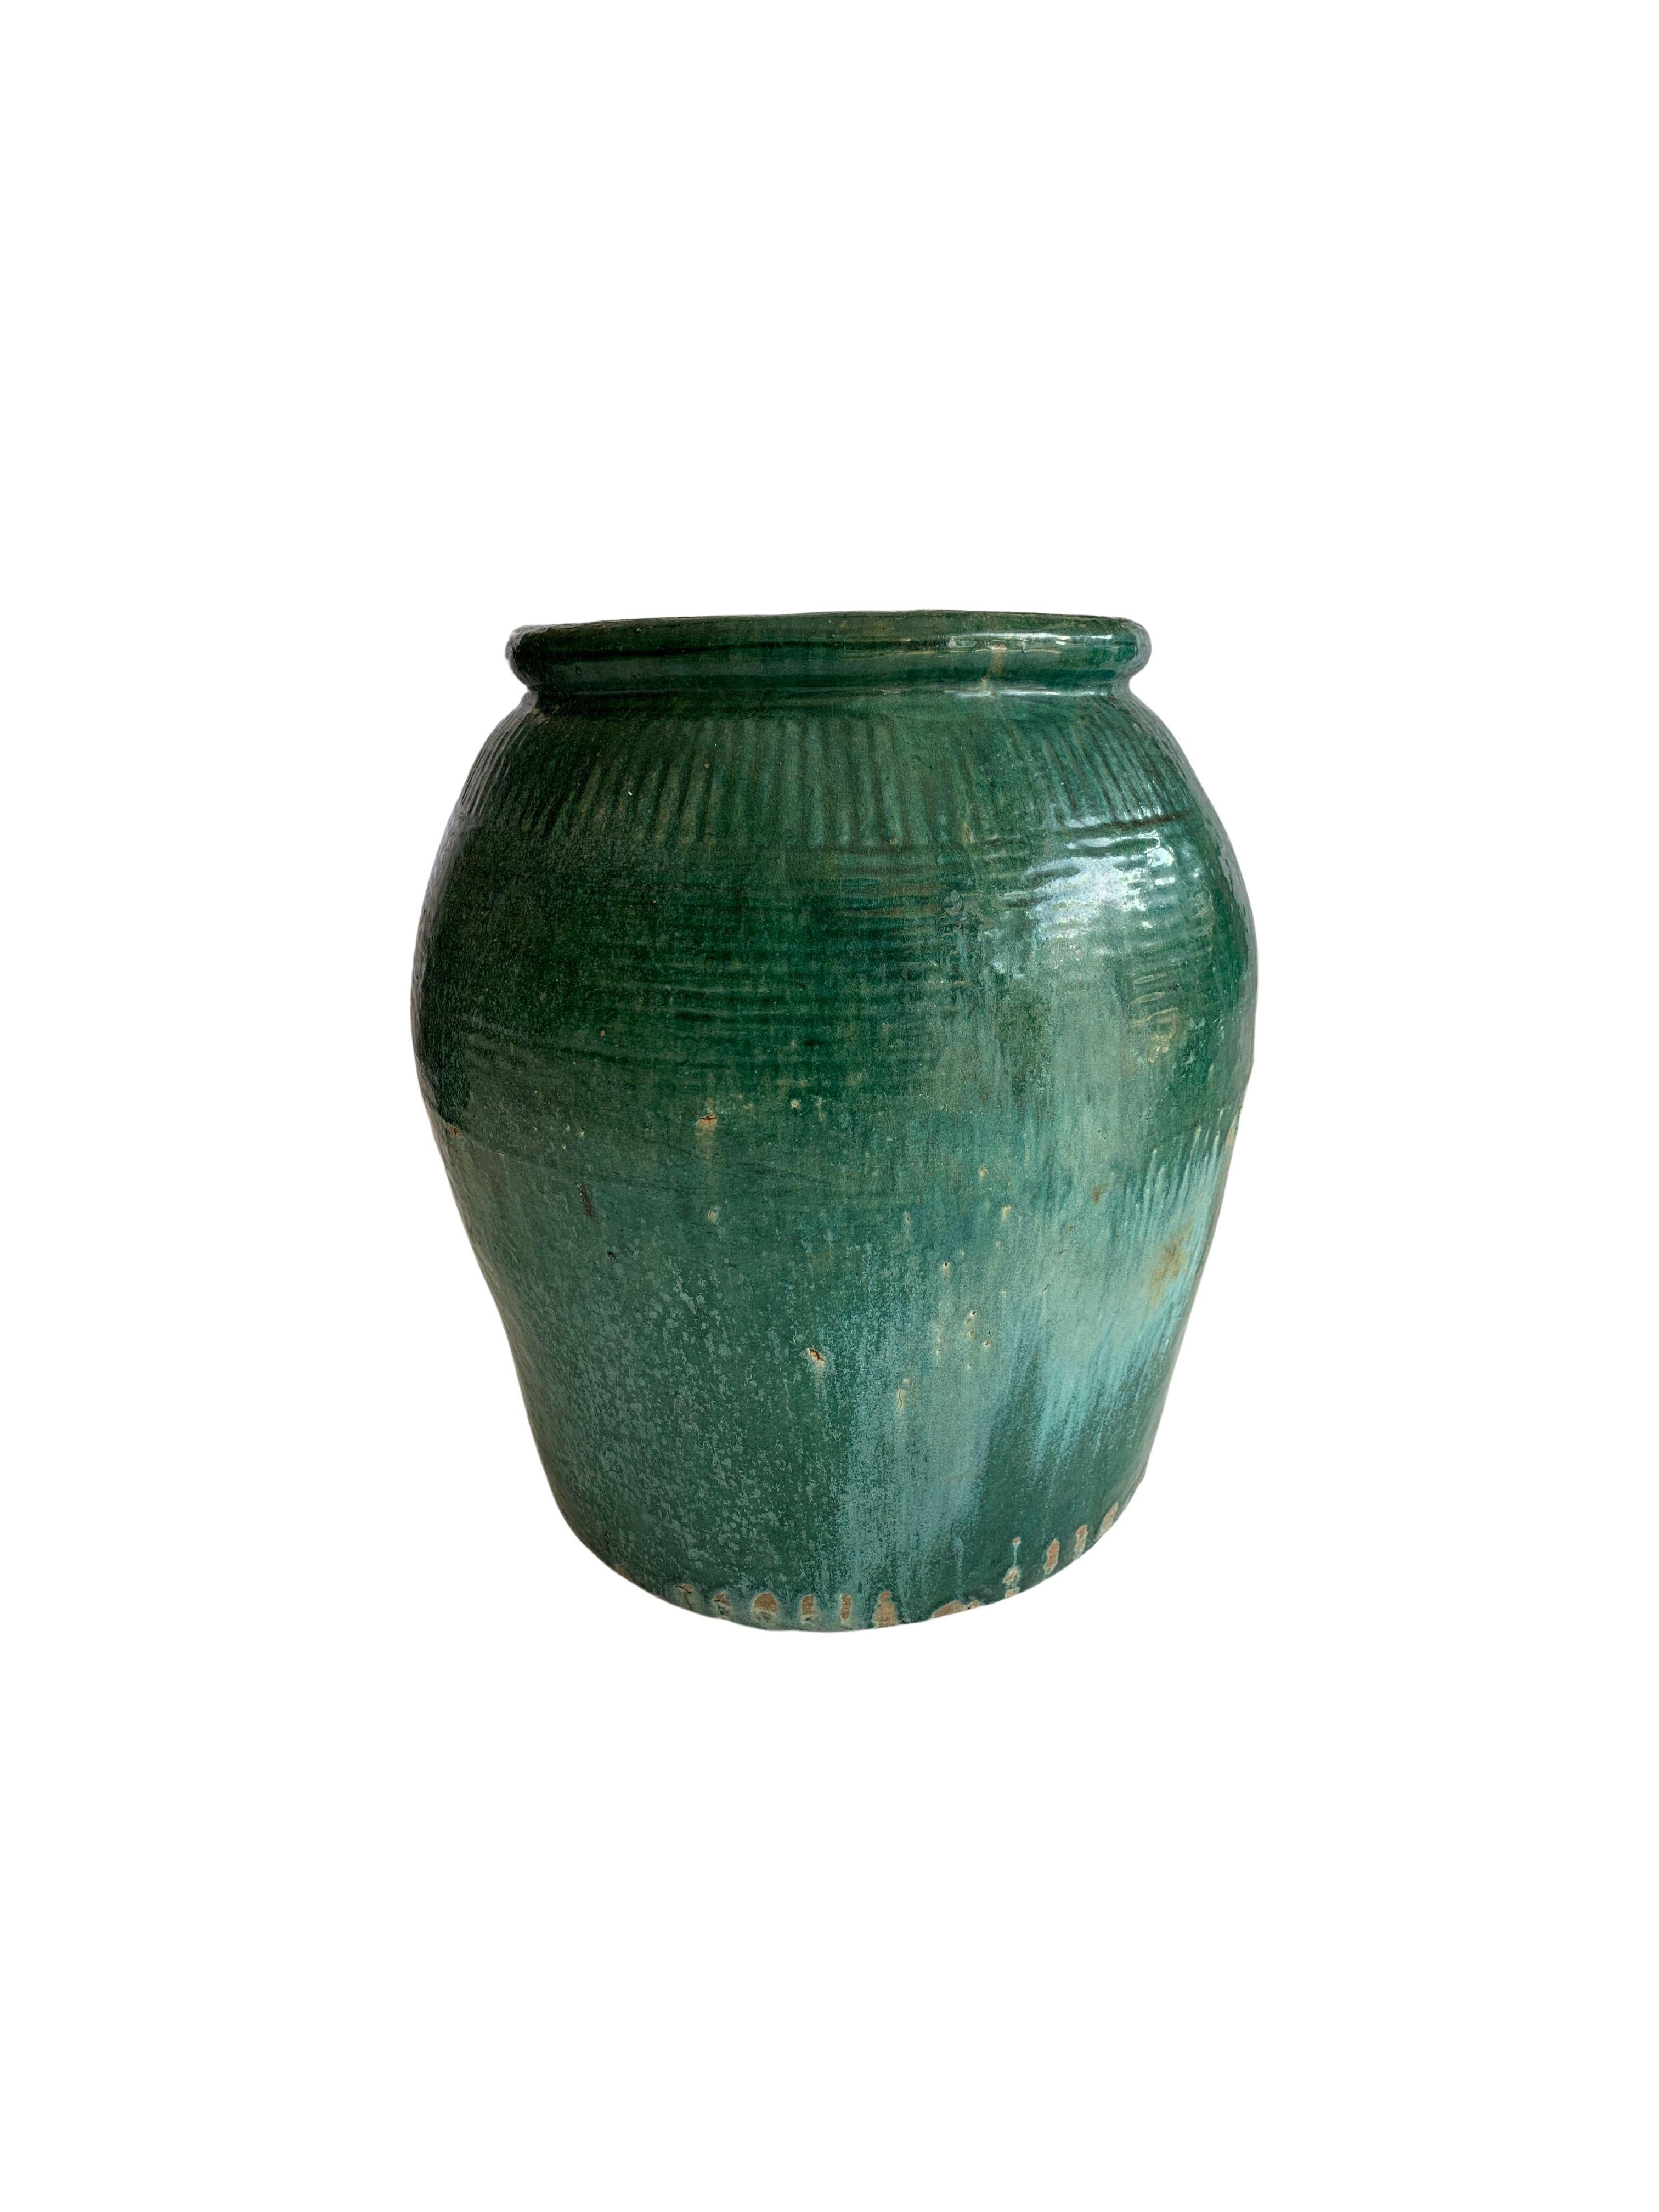 Qing Antique Chinese Green Glazed Ceramic Soy Sauce Jar, C. 1900